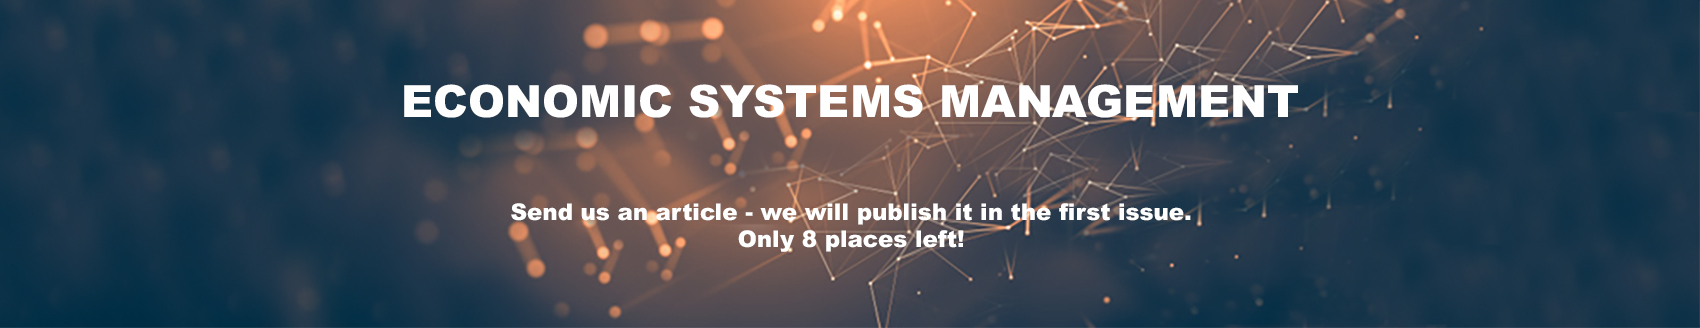  Send us an article to publish in the first issue